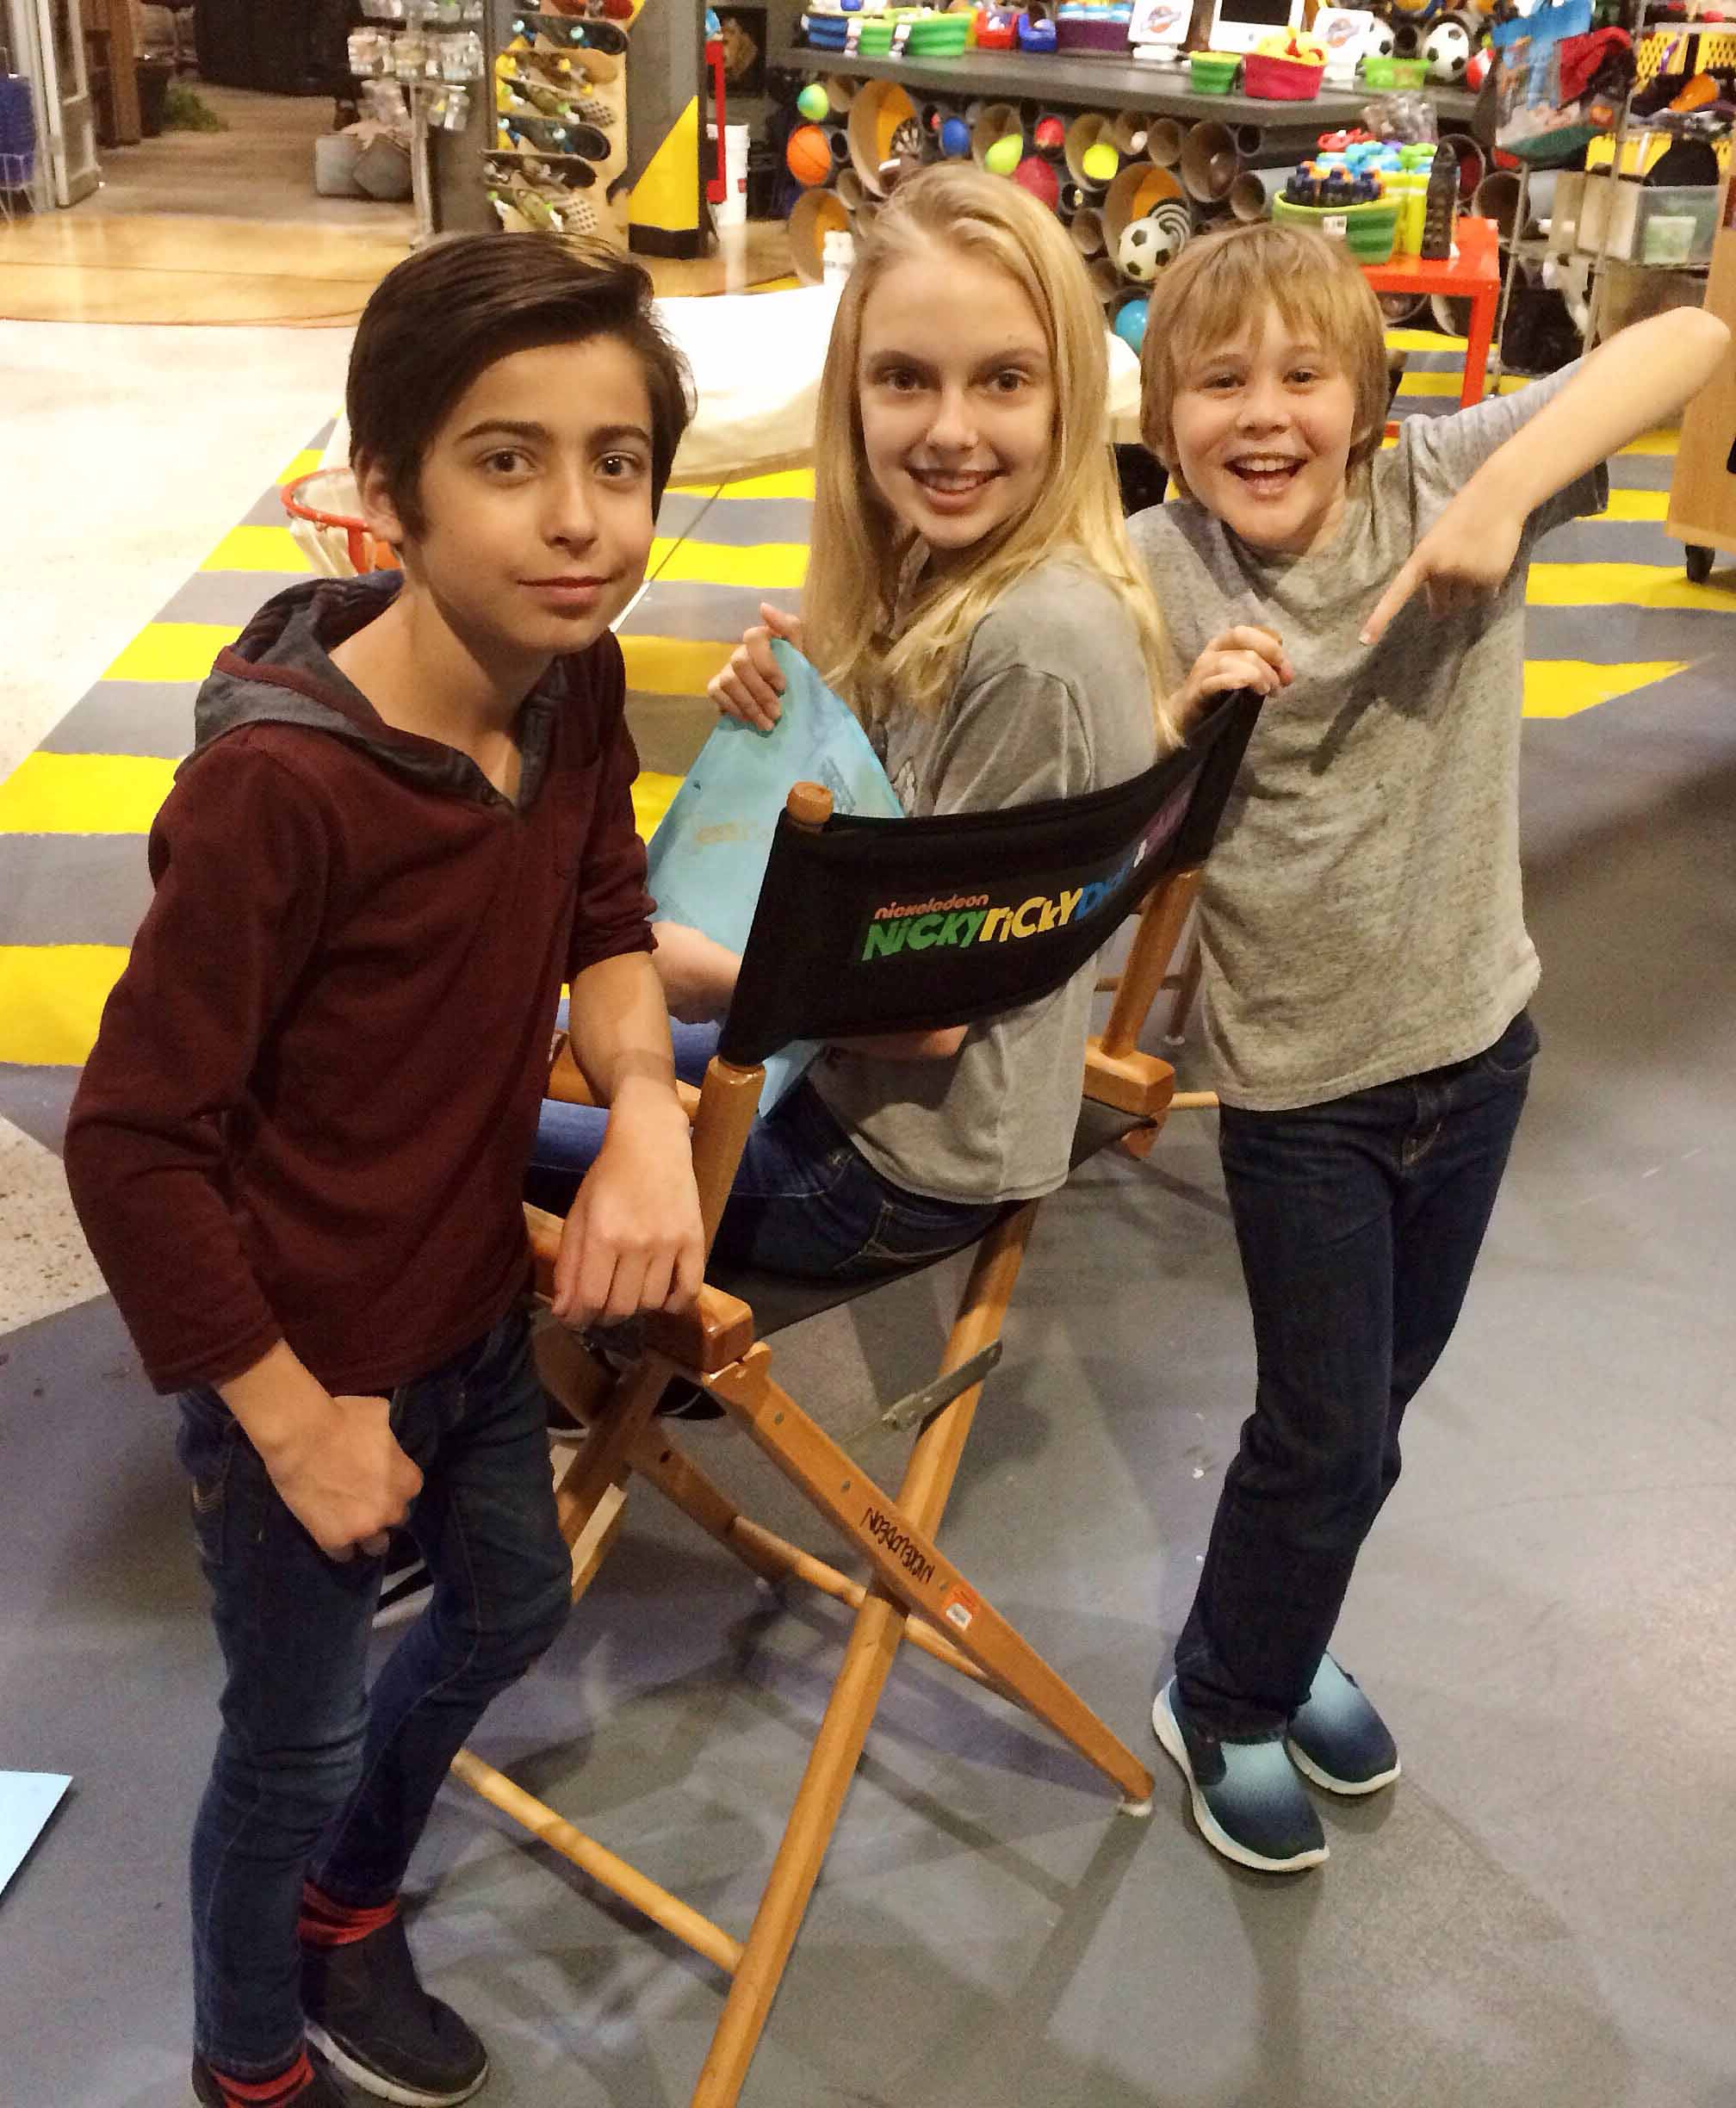 Jessica Belkin,Aidan Gallagher and Casey Simpson in Nicky, Ricky, Dicky & Dawn/Episode: Quaddy-Shack,Dir.Eric Dean Seaton